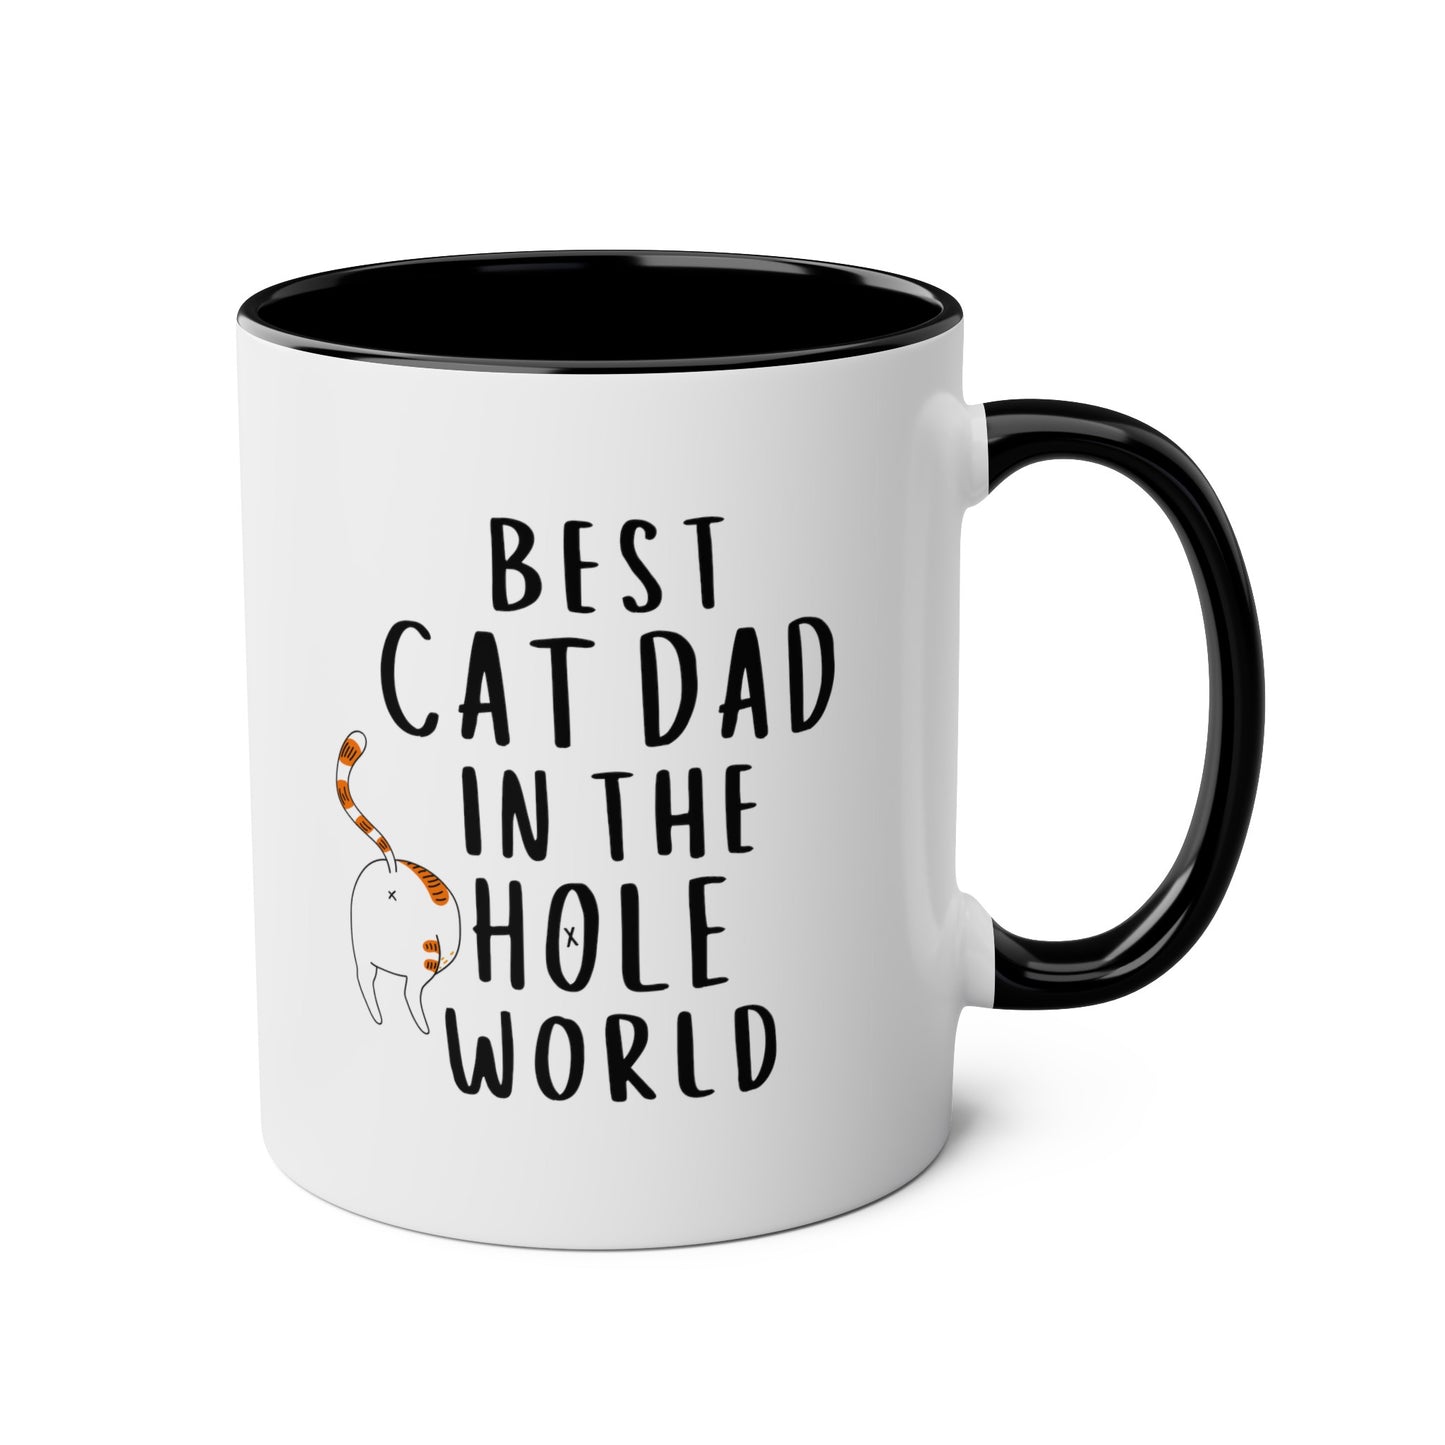 Best Cat Dad In The Hole World 11oz white with black accent funny large coffee mug gift for father's day furdad furparent waveywares wavey wares wavywares wavy wares